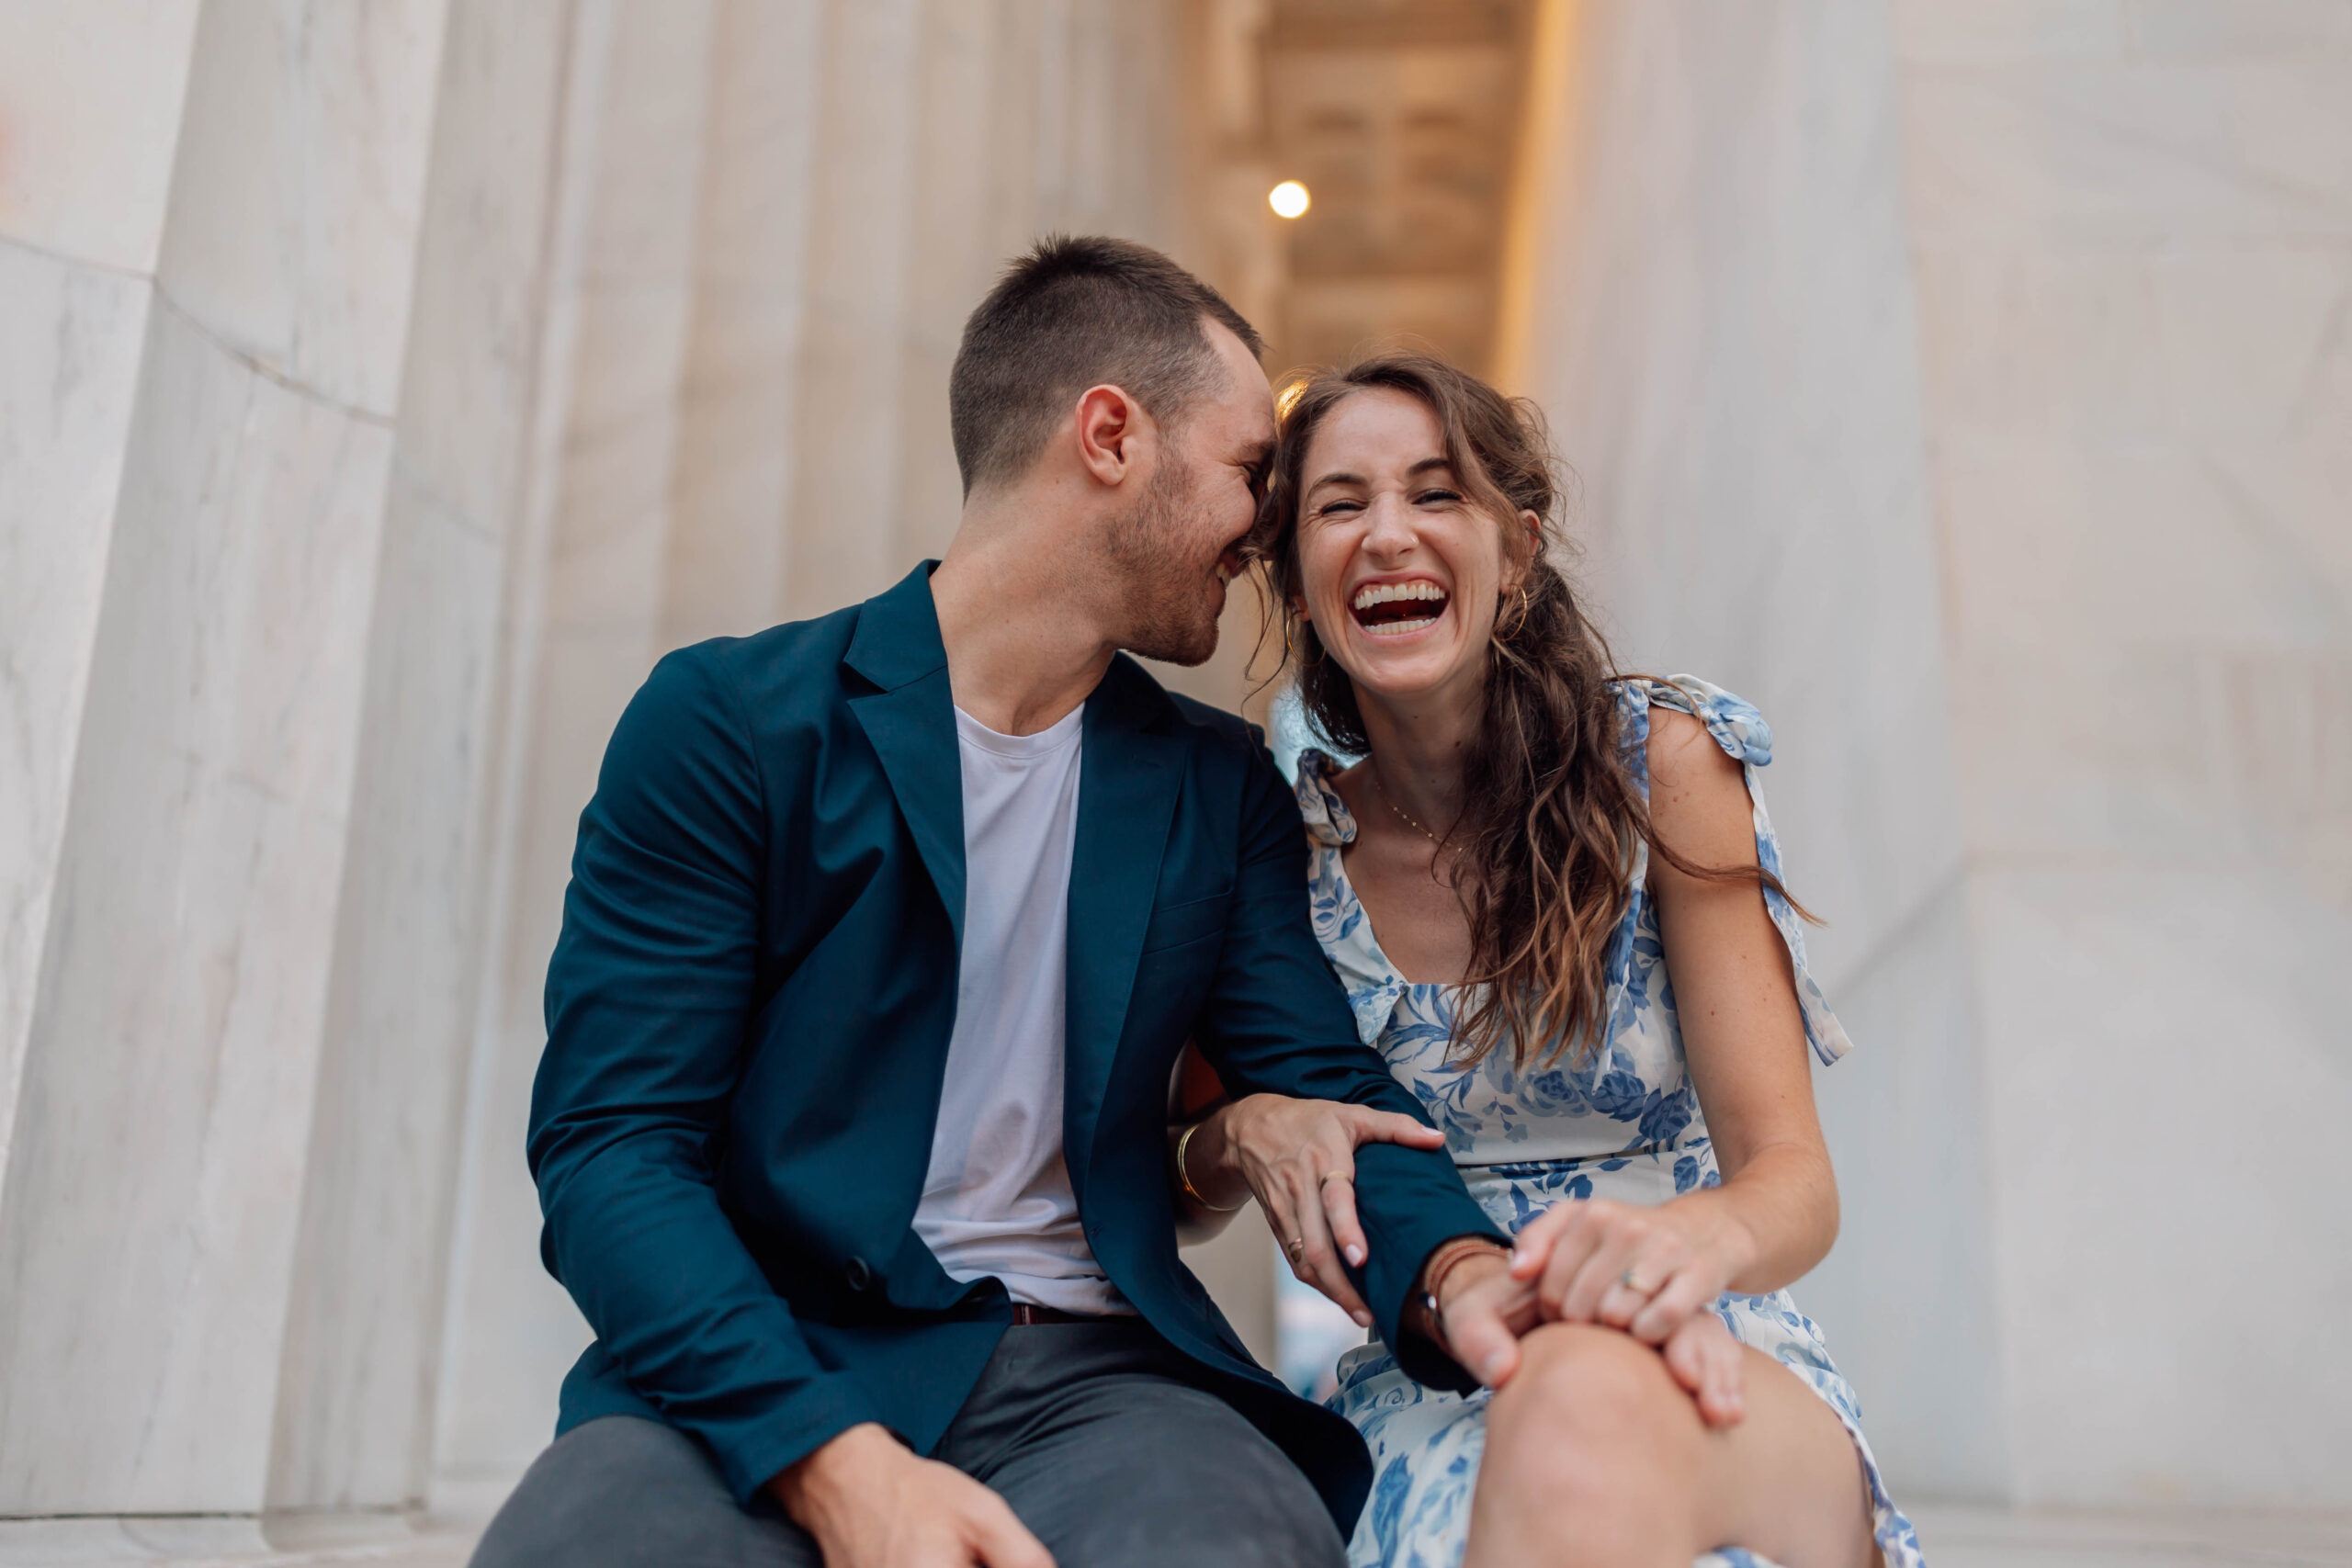 Roman Washington D.C. Engagement Photo Session at The Lincoln Memorial. True to color, cinematic photography